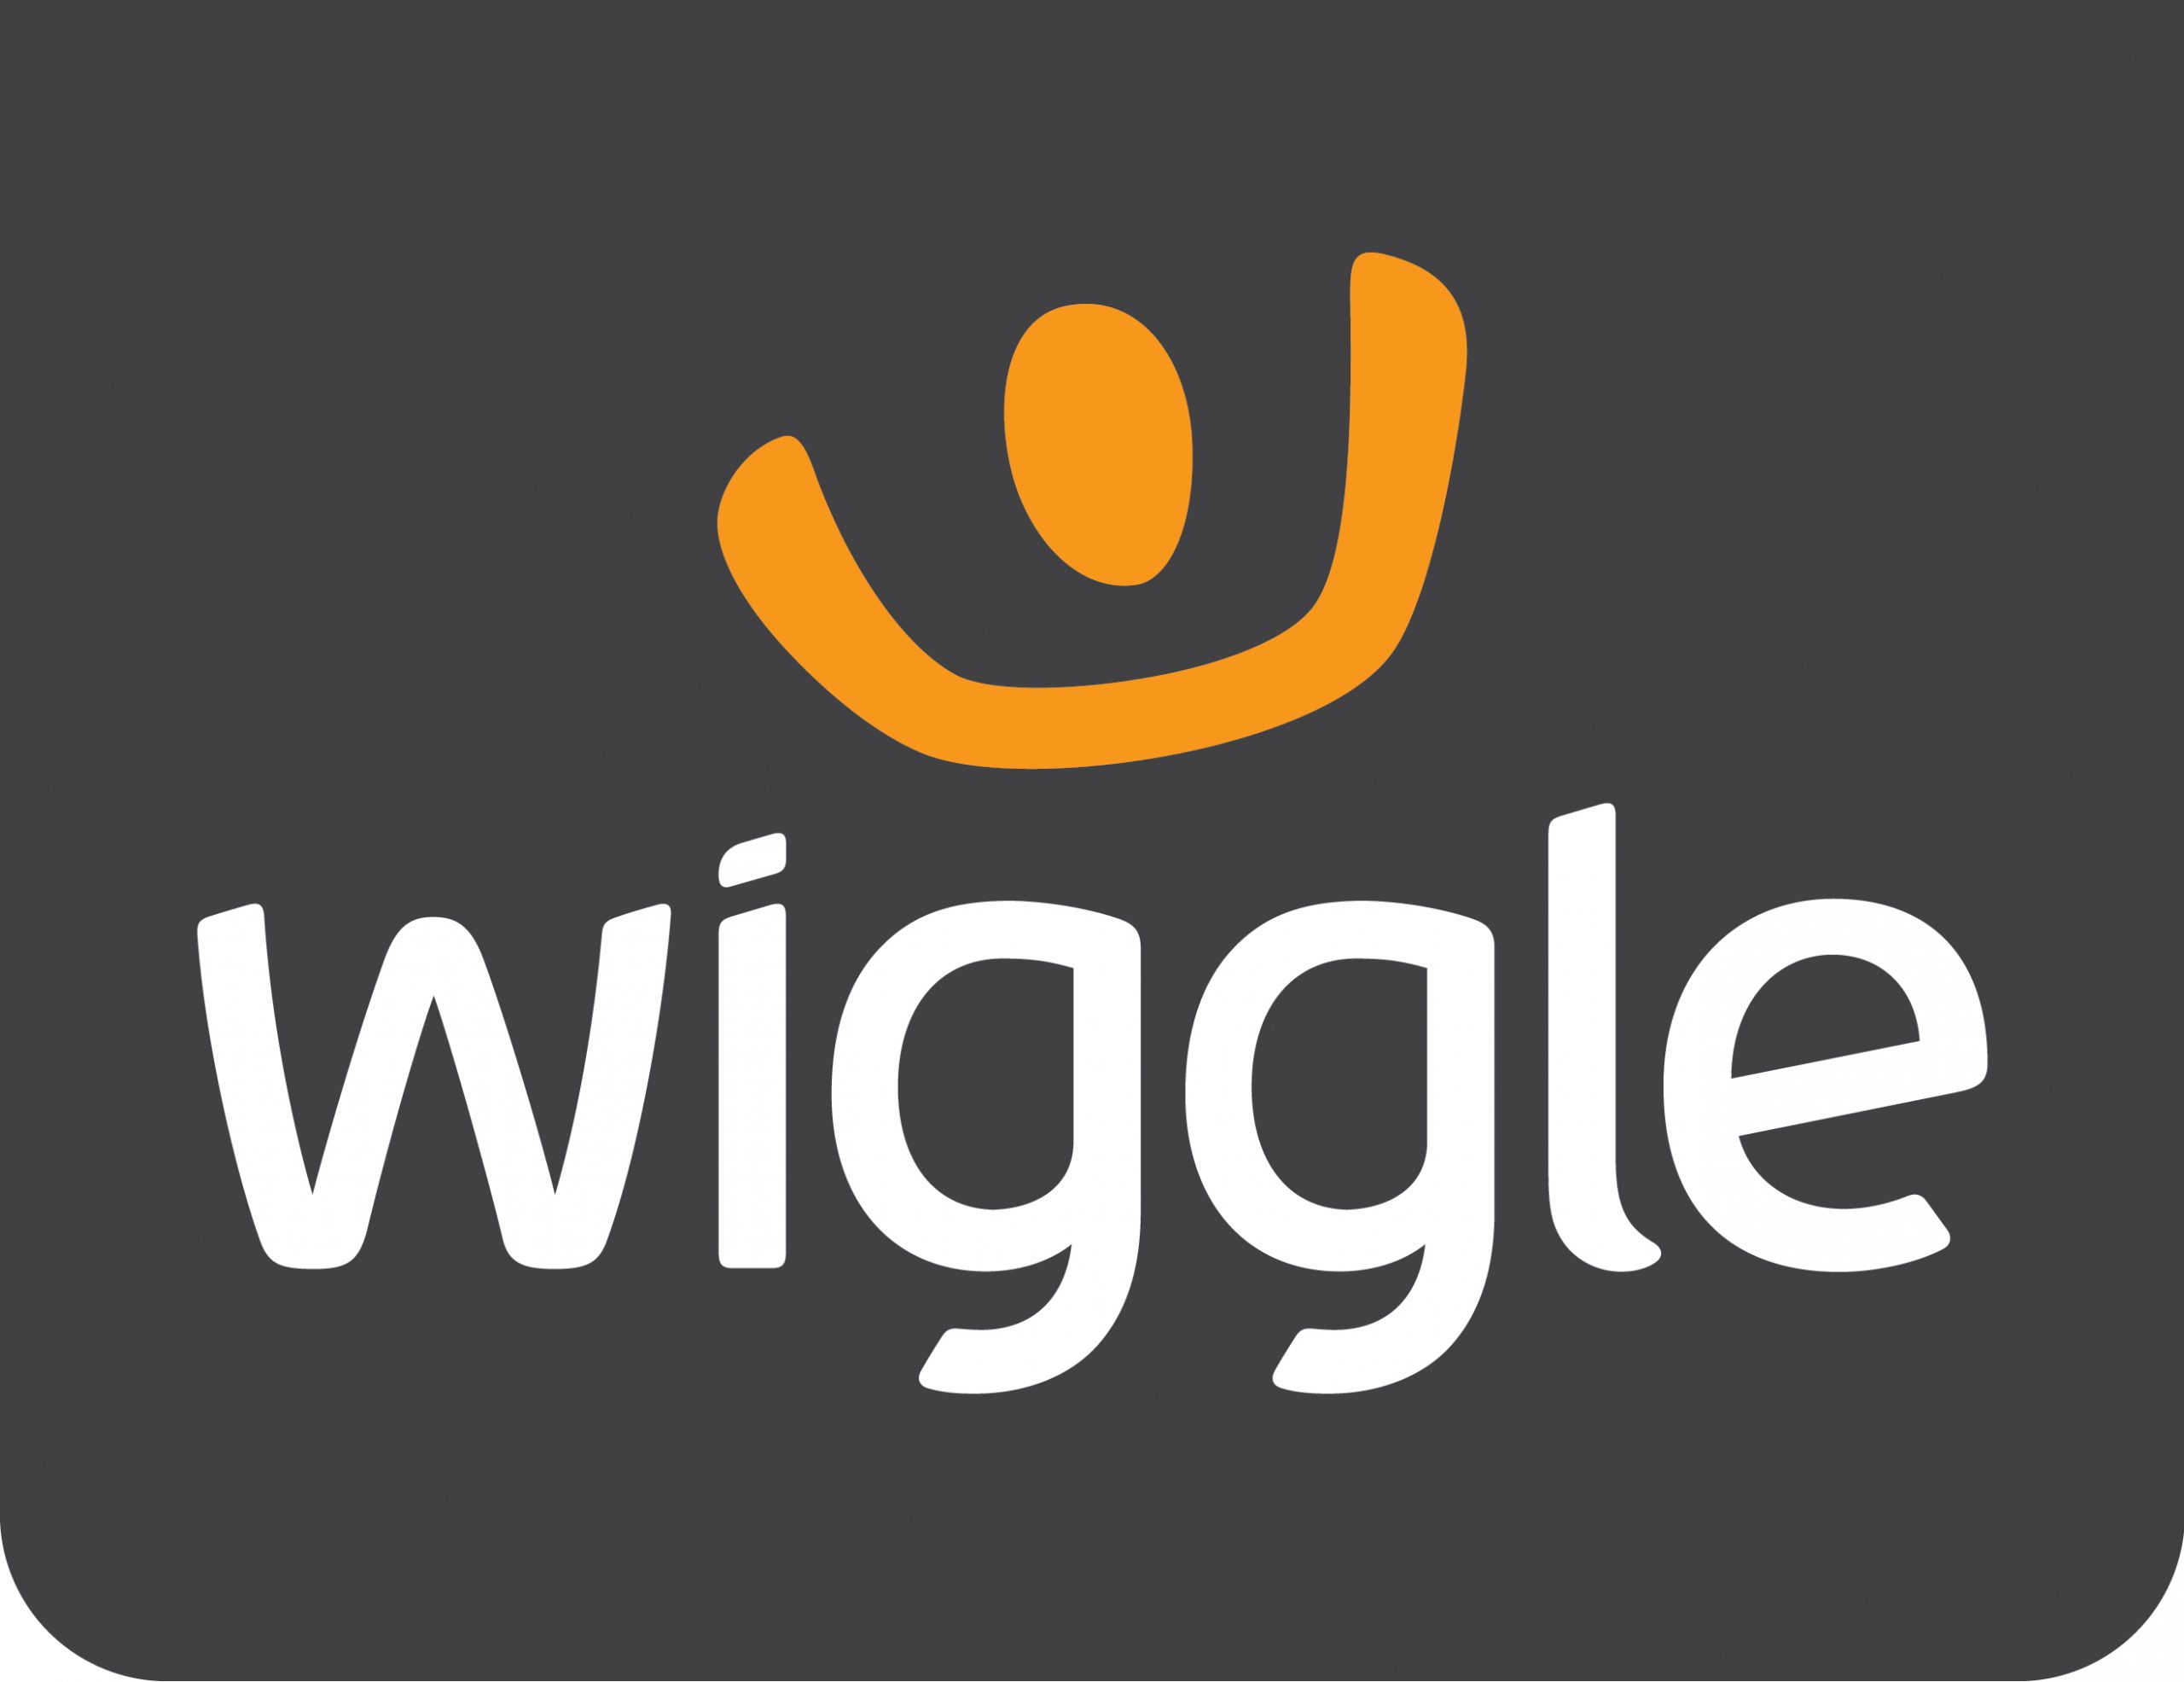 Wiggle in tandem with Doddle